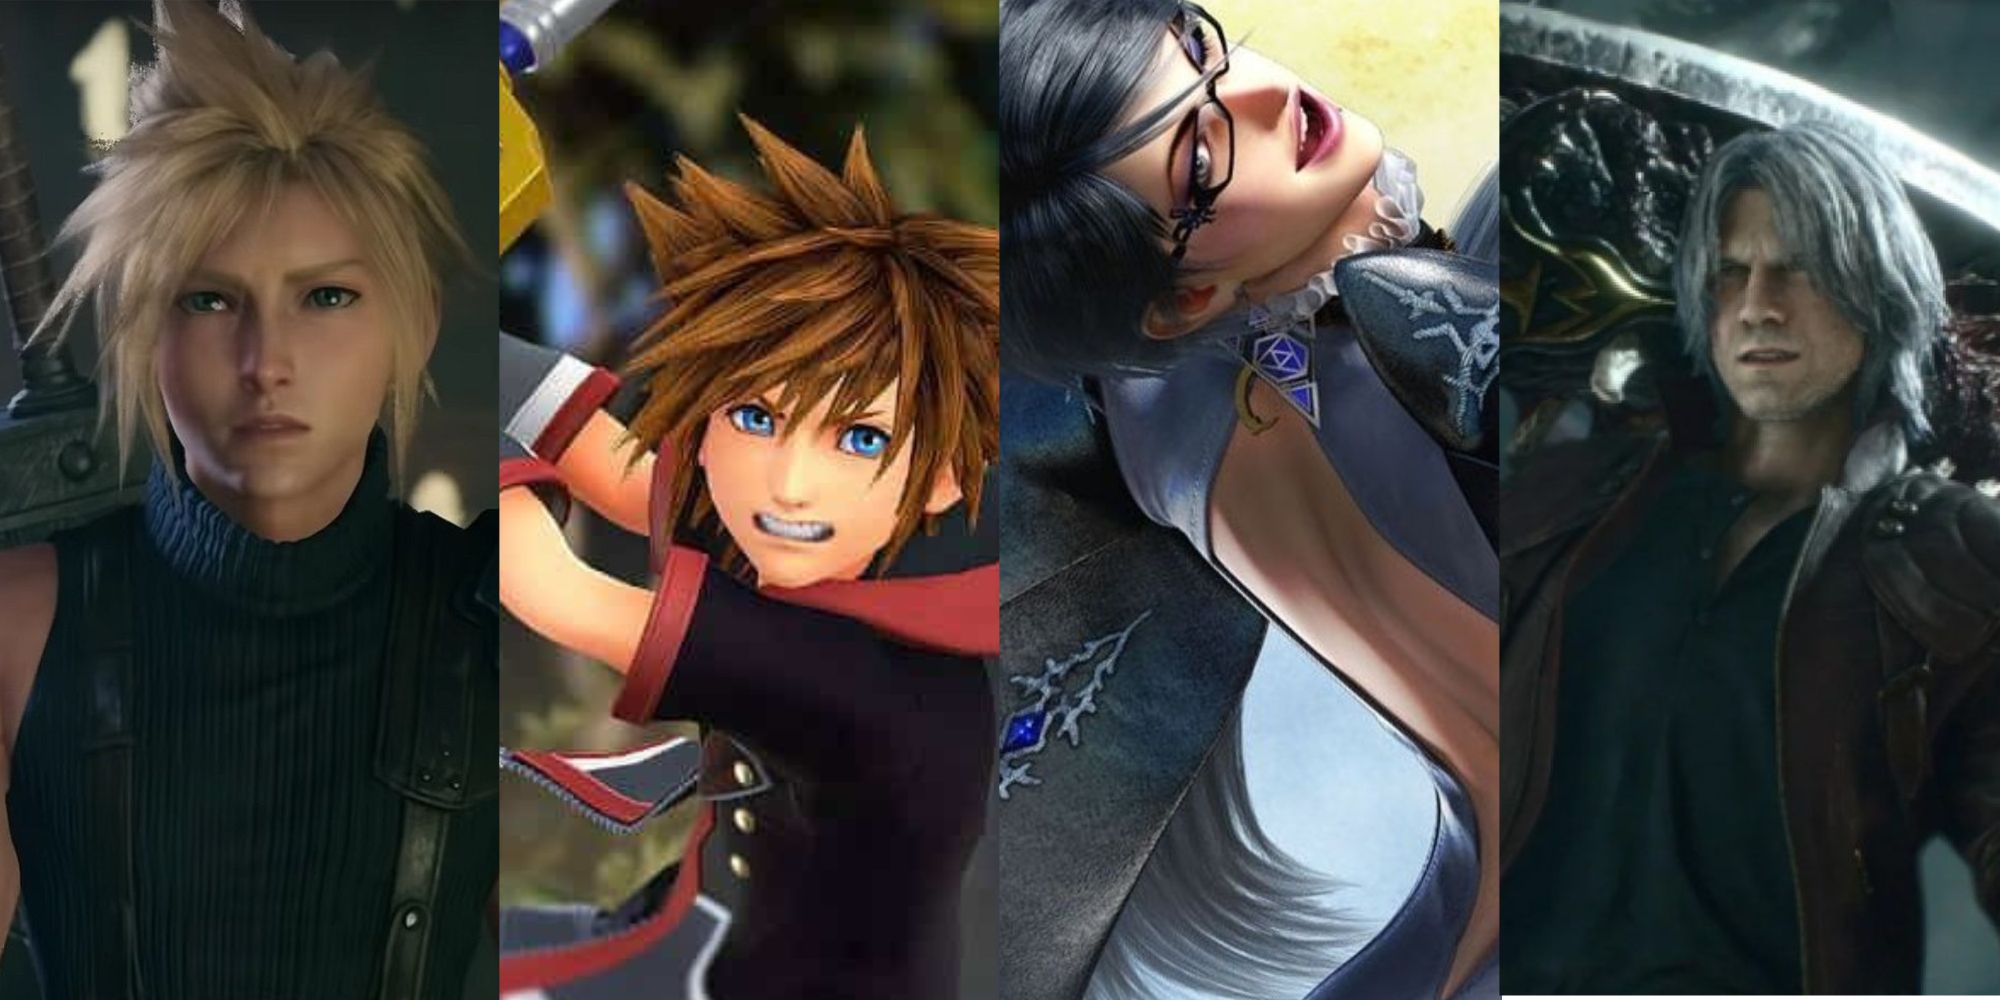 Kingdom Hearts Collaboration Adds Famous Faces to Final Fantasy